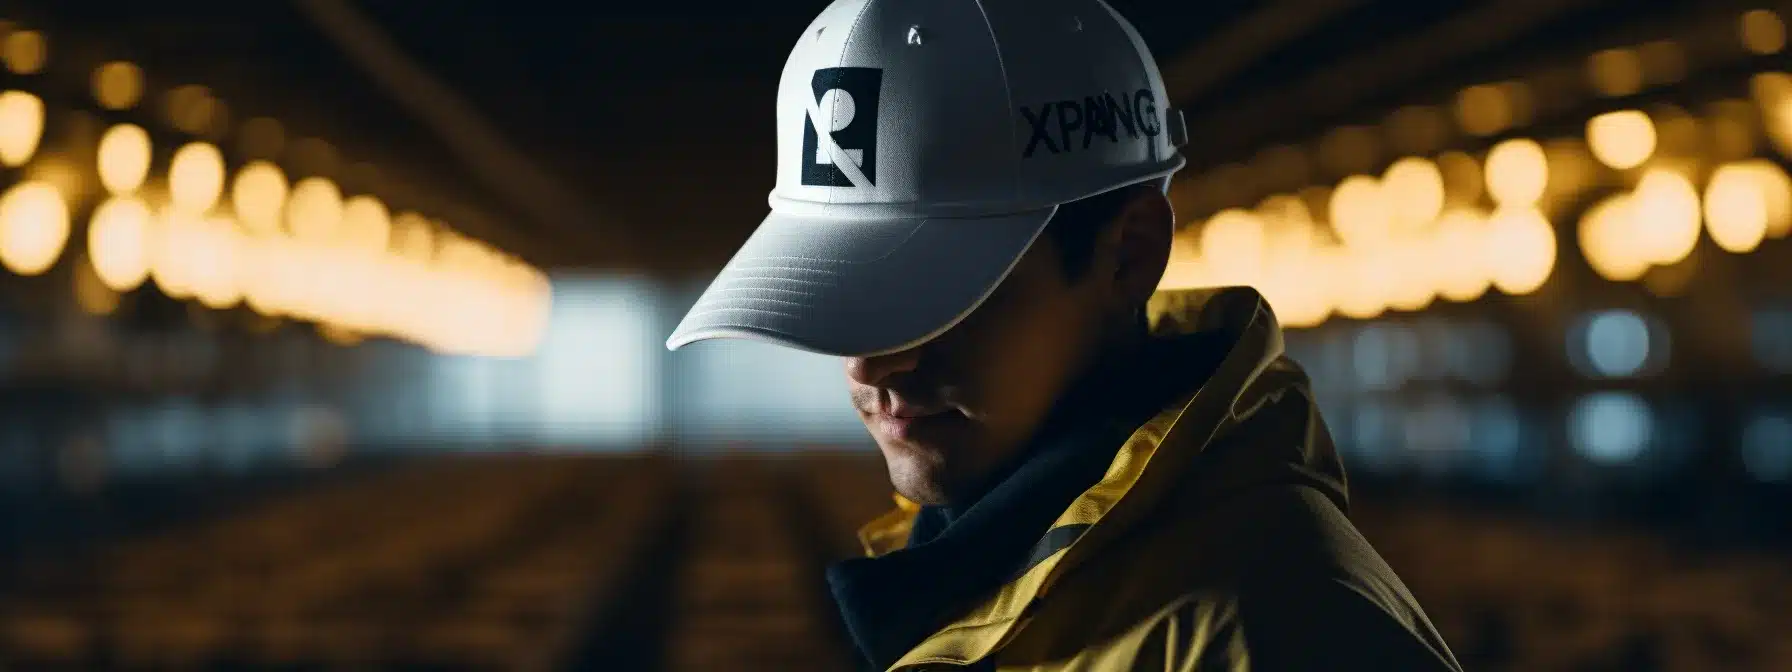 A Person Wearing An Investigator'S Cap Holding A Measuring Tape Against A Brand Logo While Looking At A Sea Of Forgotten Brands.